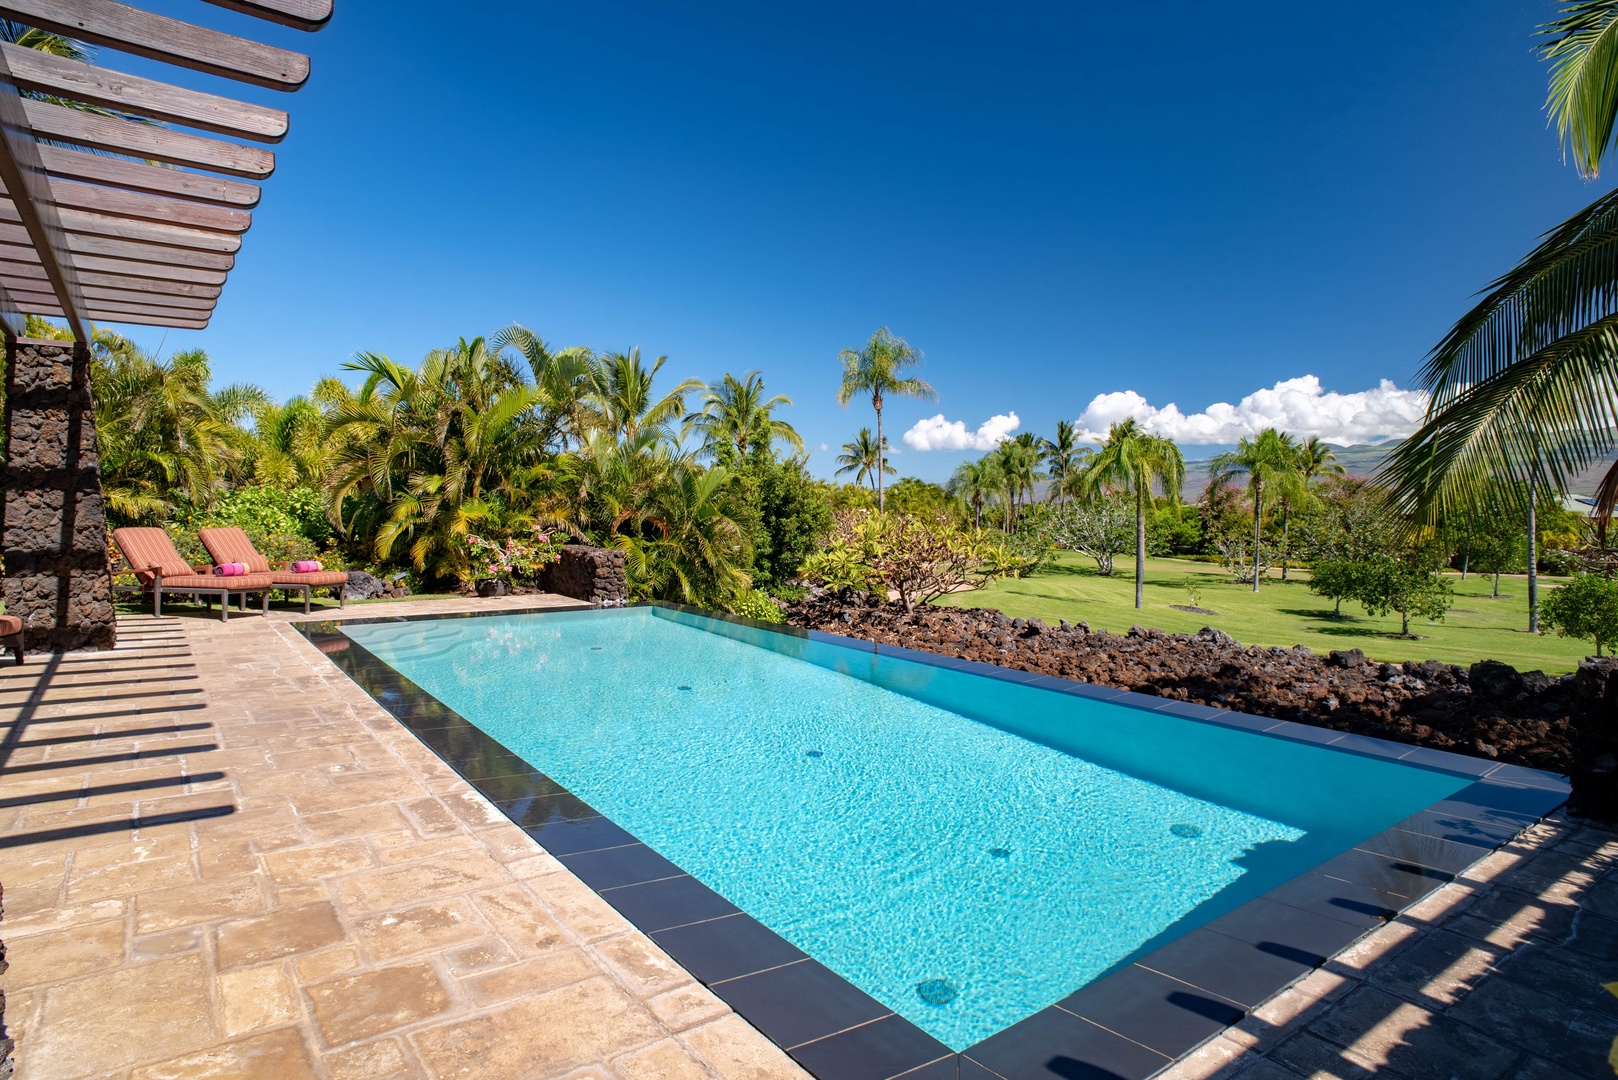 Kamuela Vacation Rentals, House of the Turtle at Champion Ridge, Mauna Lani (CR 18) - Can't Get Enough of this Sparkling Pool & View